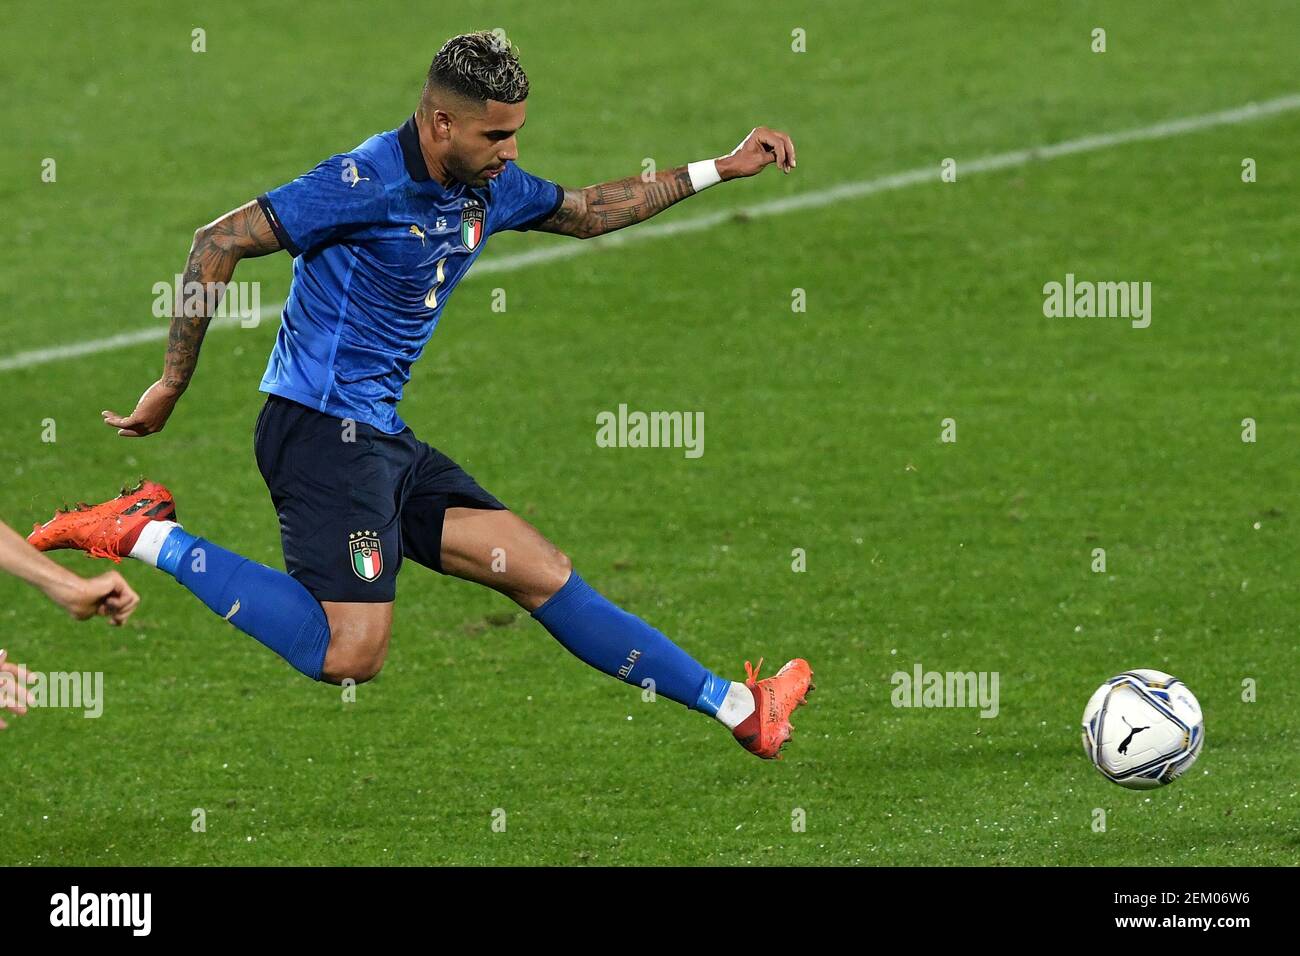 Emerson Palmieri Of Italy In Action During The Friendly Football Match Between Italy And Estonia At